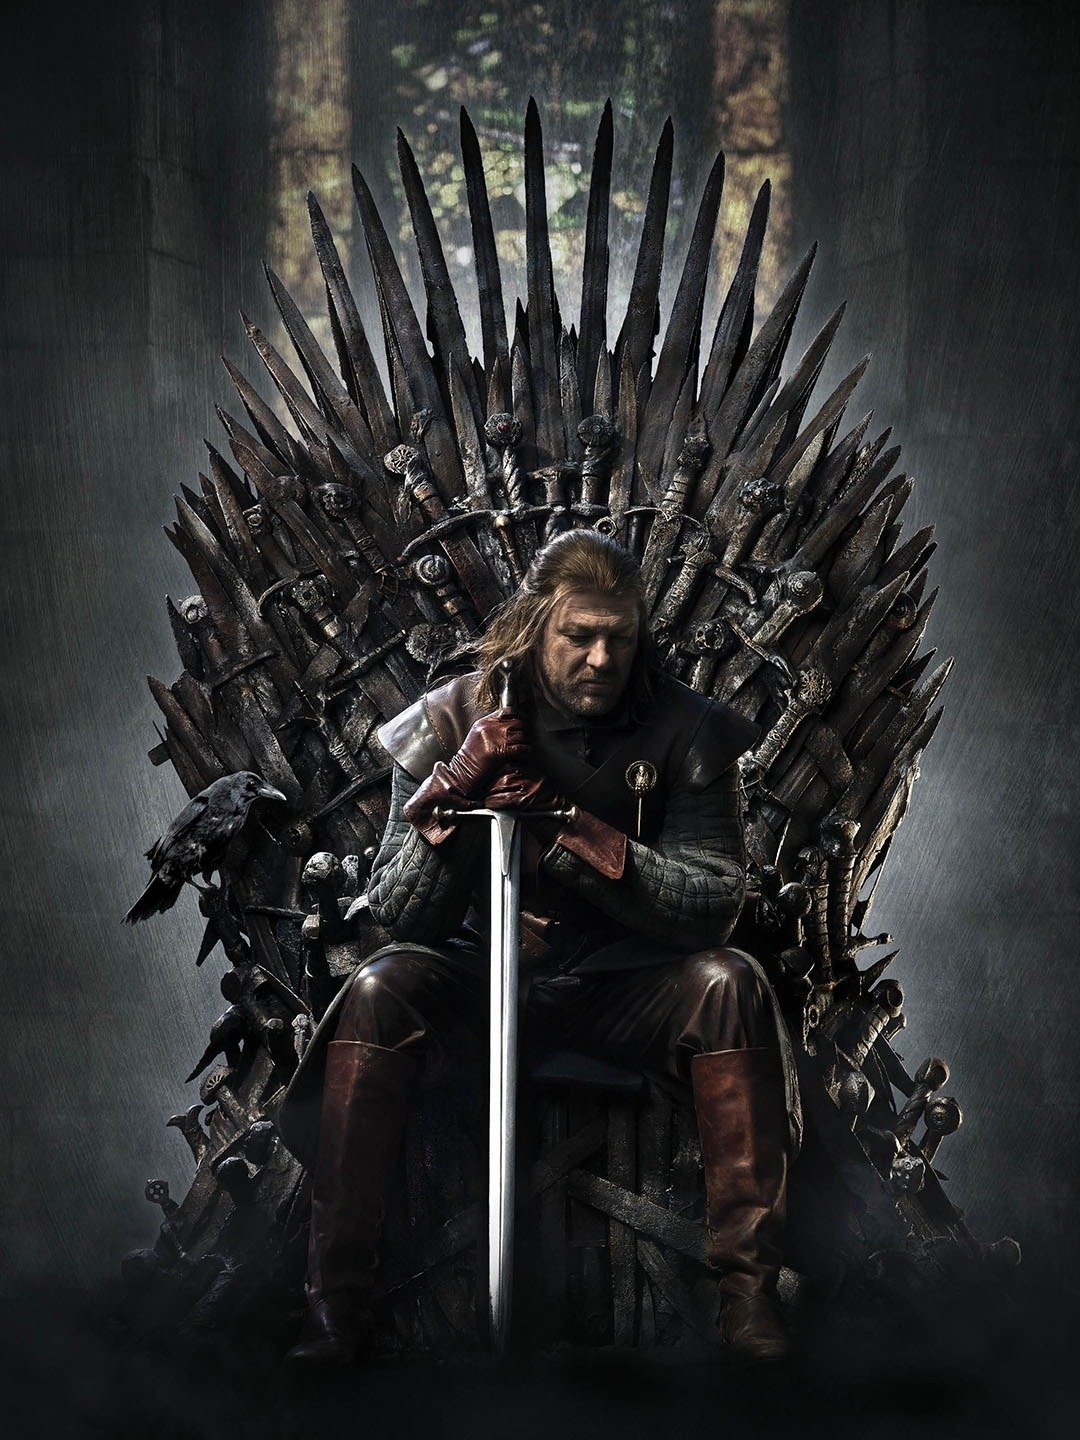 Where can I watch Game of Thrones online? - Quora